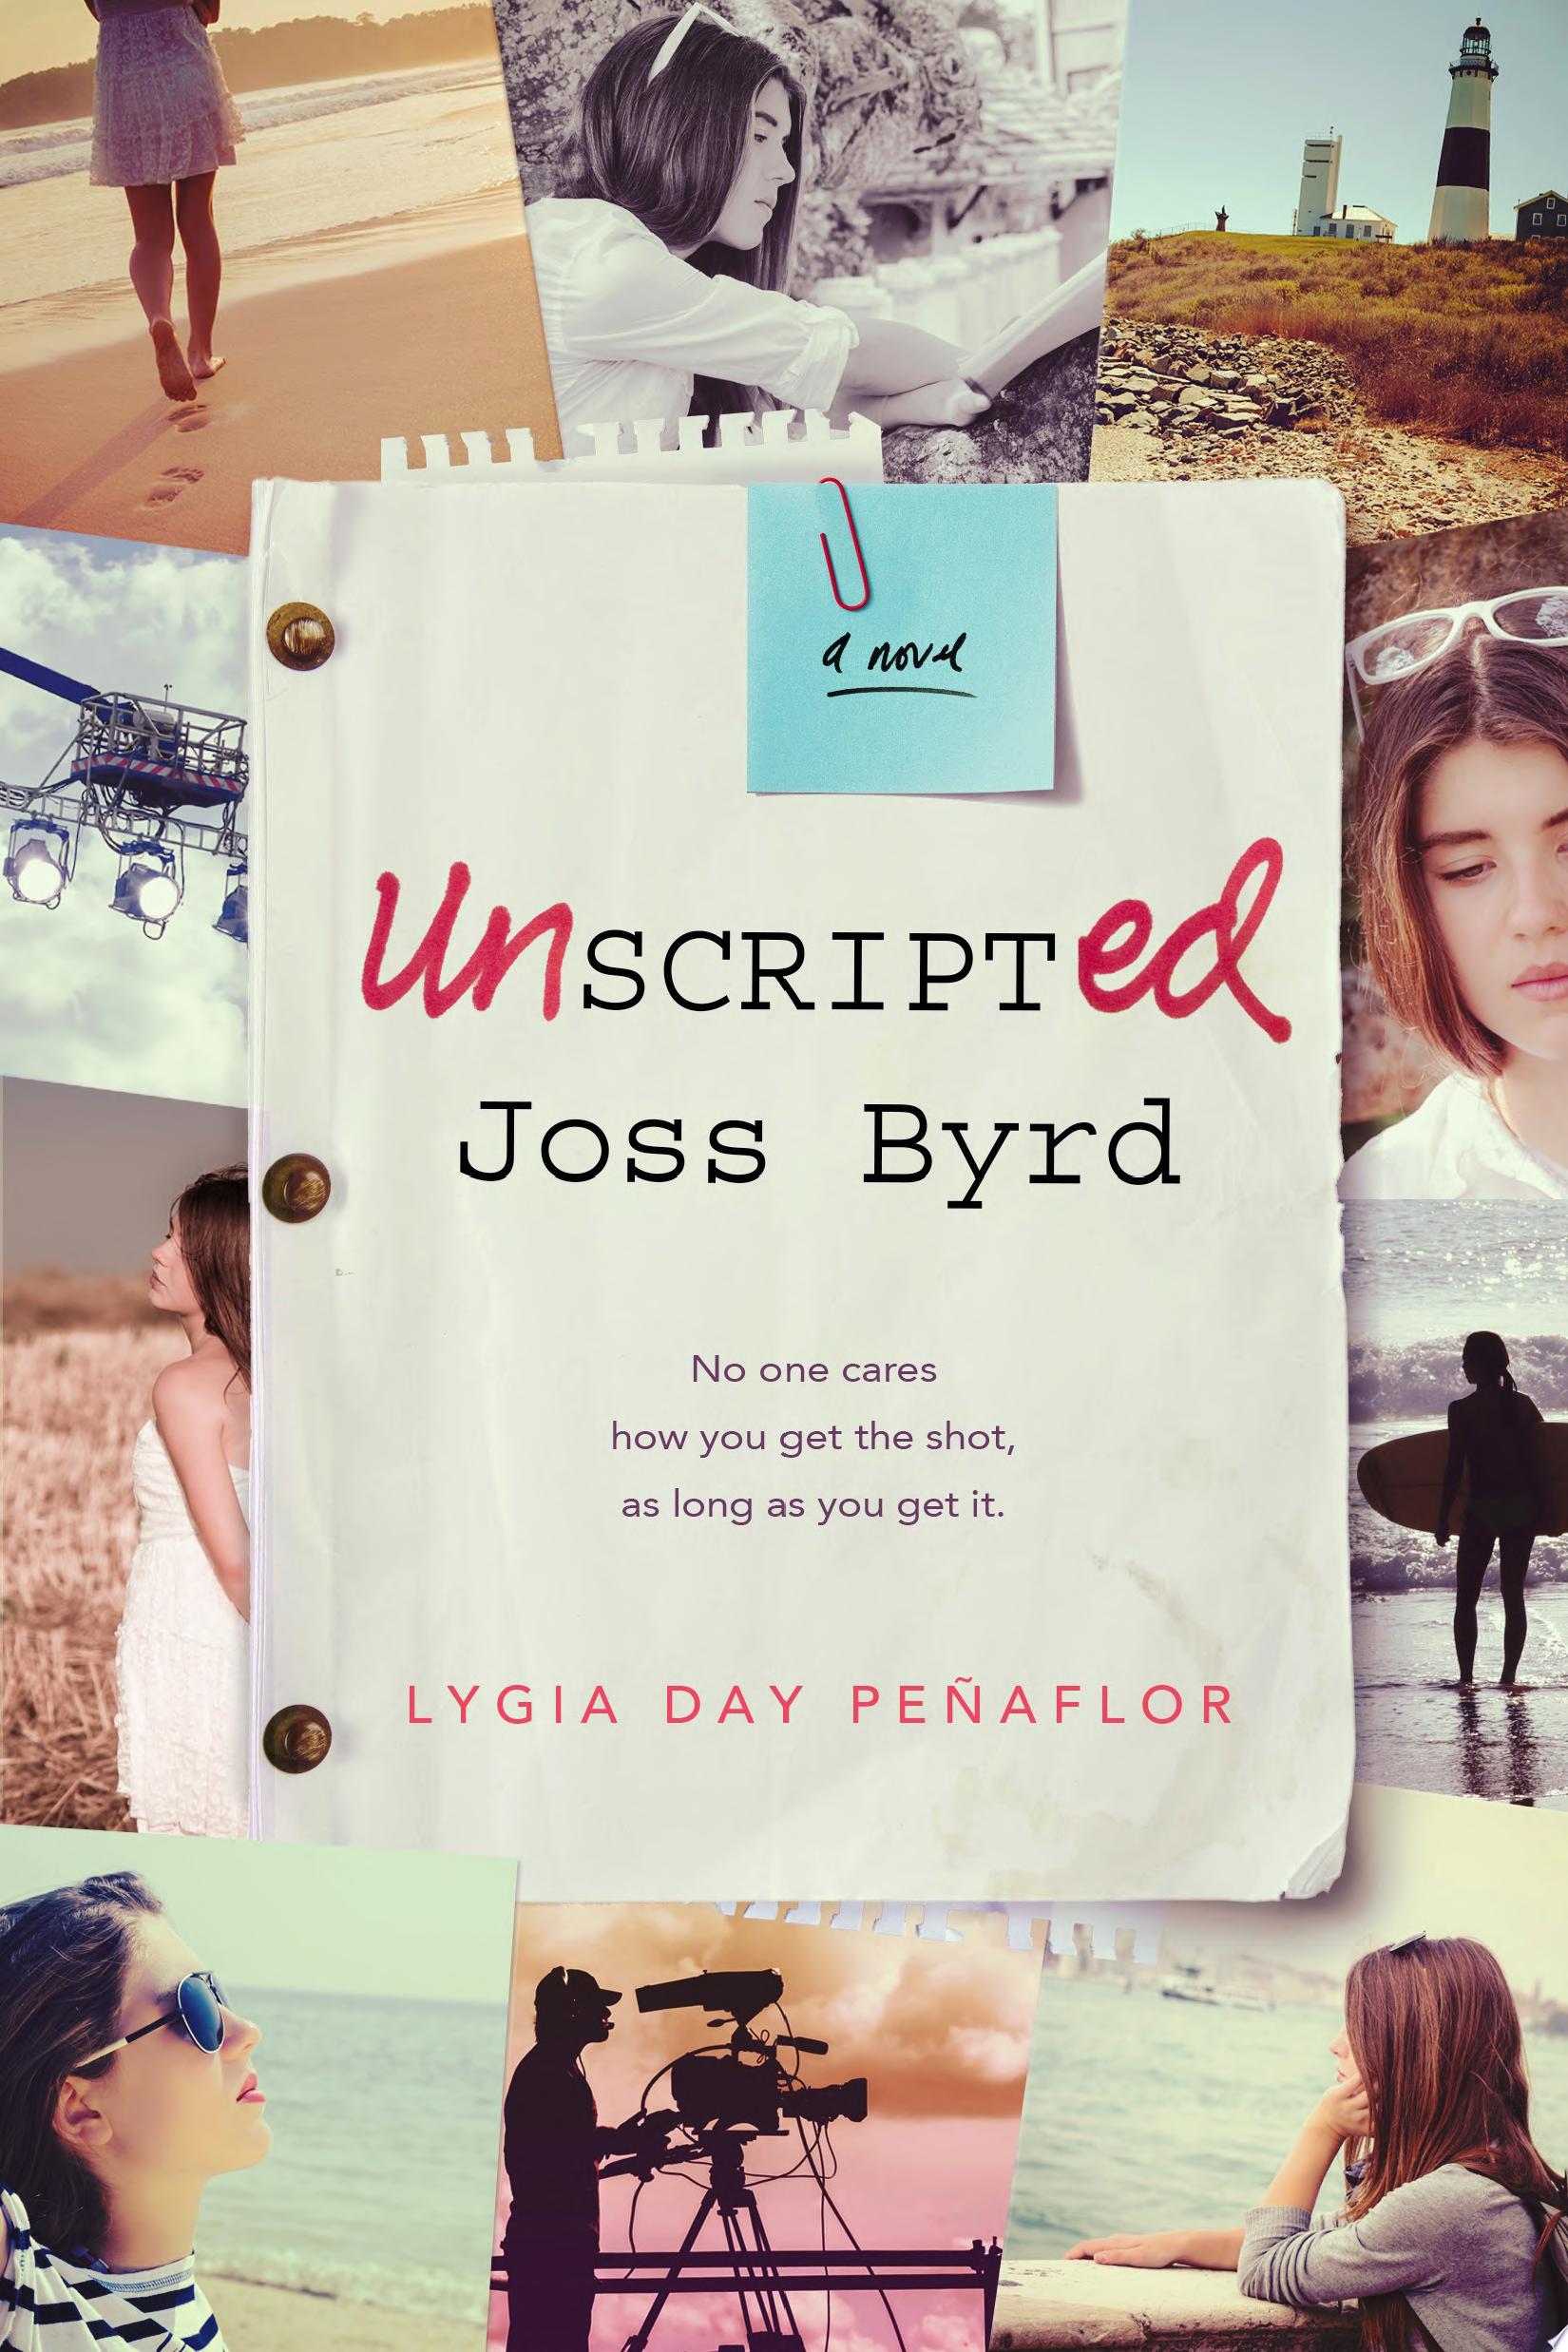 Image for "Unscripted Joss Byrd"